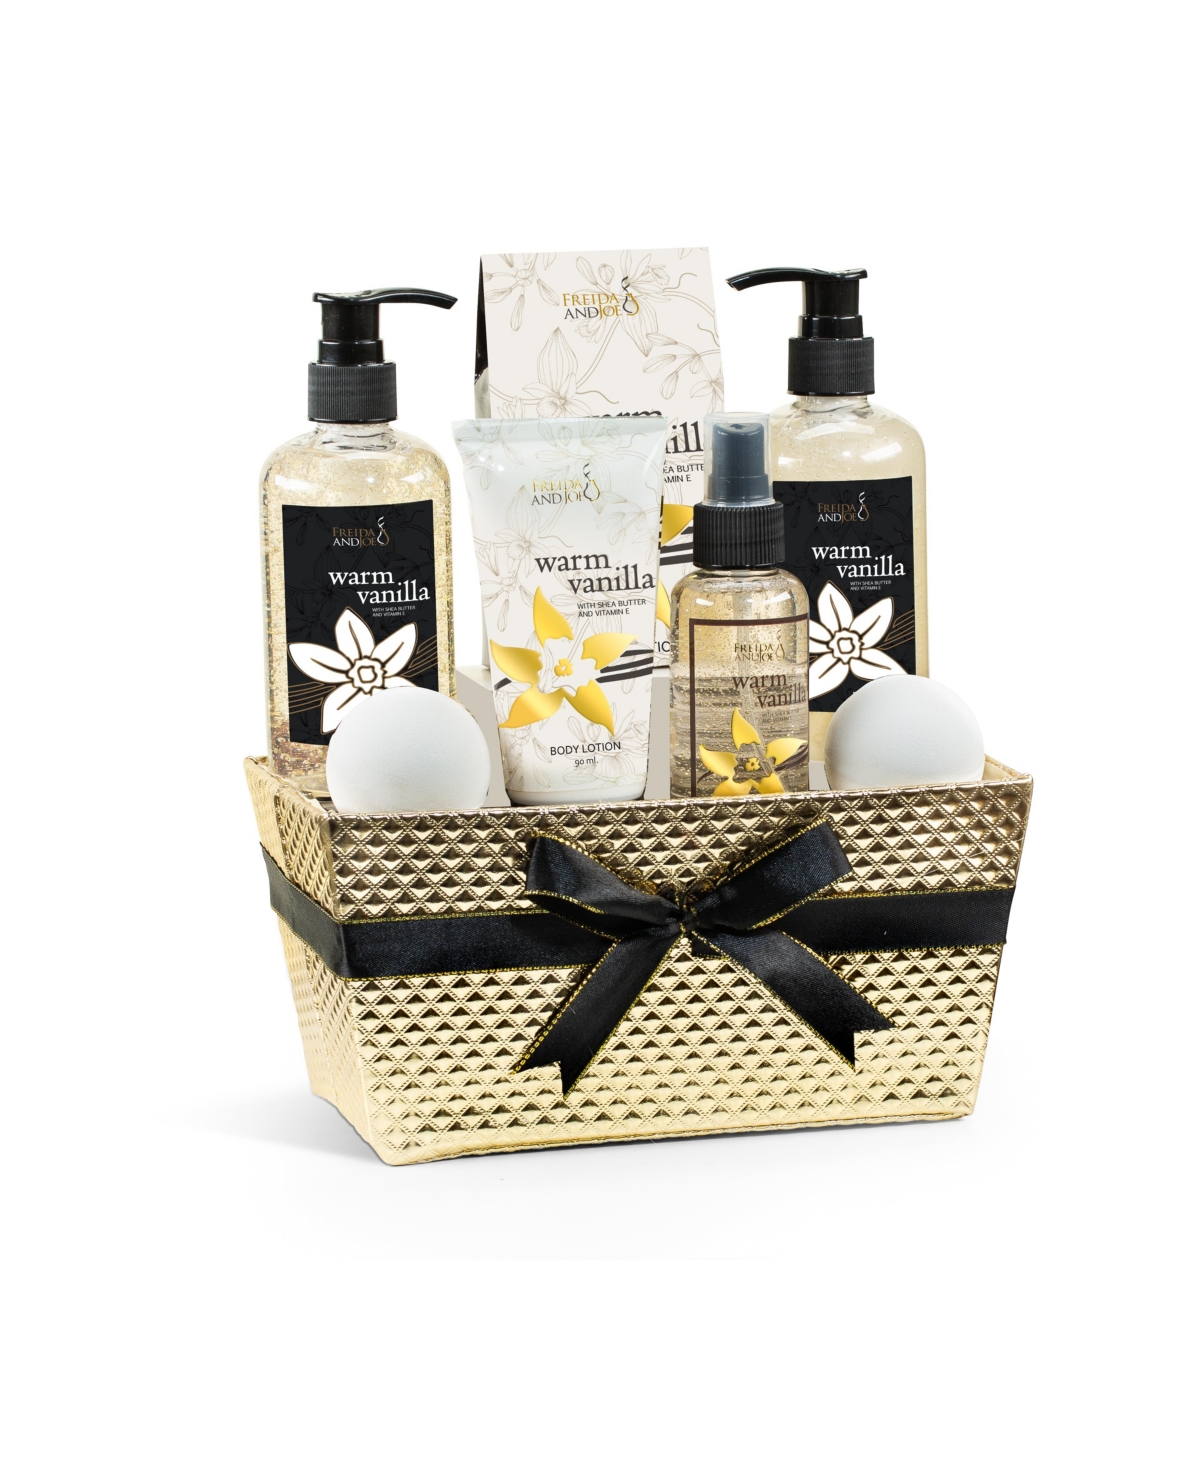 Warm Vanilla Fragrance Bath & Body Set in Gold Basket Luxury Body Care Mothers Day Gifts for Mom